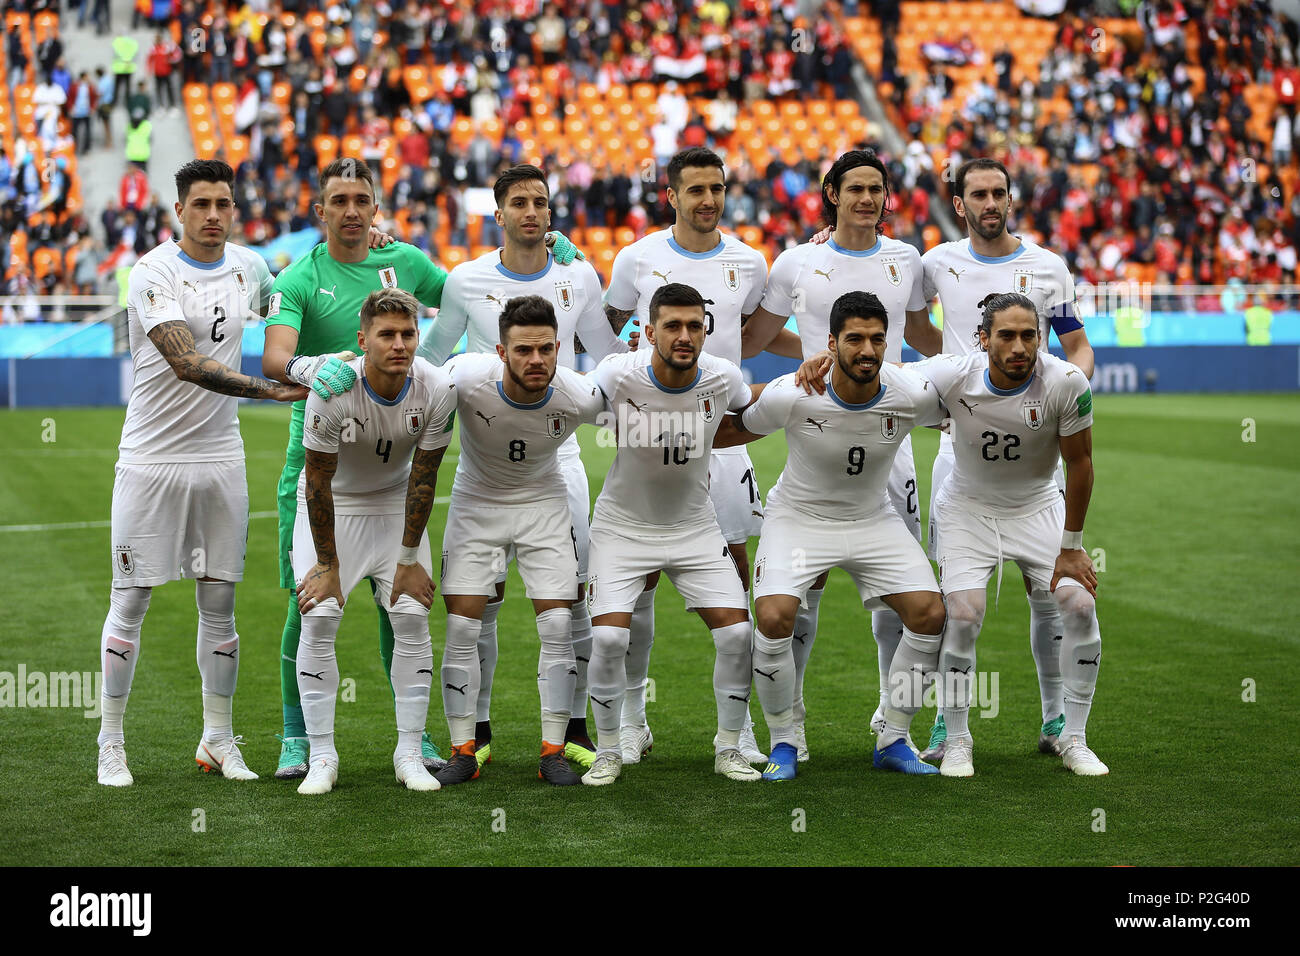 Yekaterinburg Russia 15th June 18 Uruguay Players Line Up Prior To The Beginning Of The Fifa World Cup 18 Group A Soccer Match Between Egypt And Uruguay At The Ekaterinburg Arena In